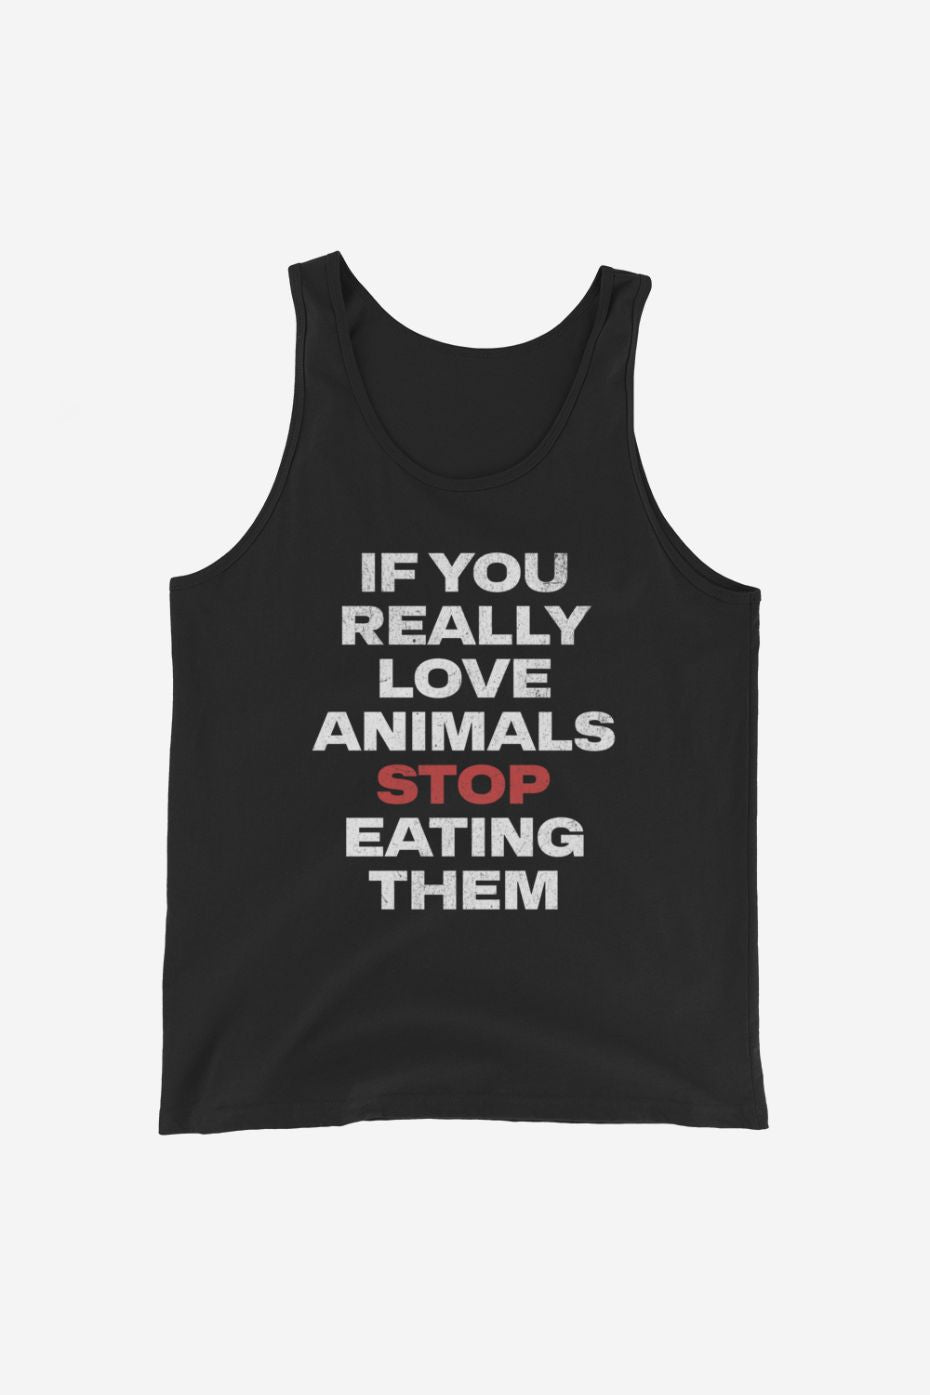 If You Really Love Animals - Unisex Tank Top